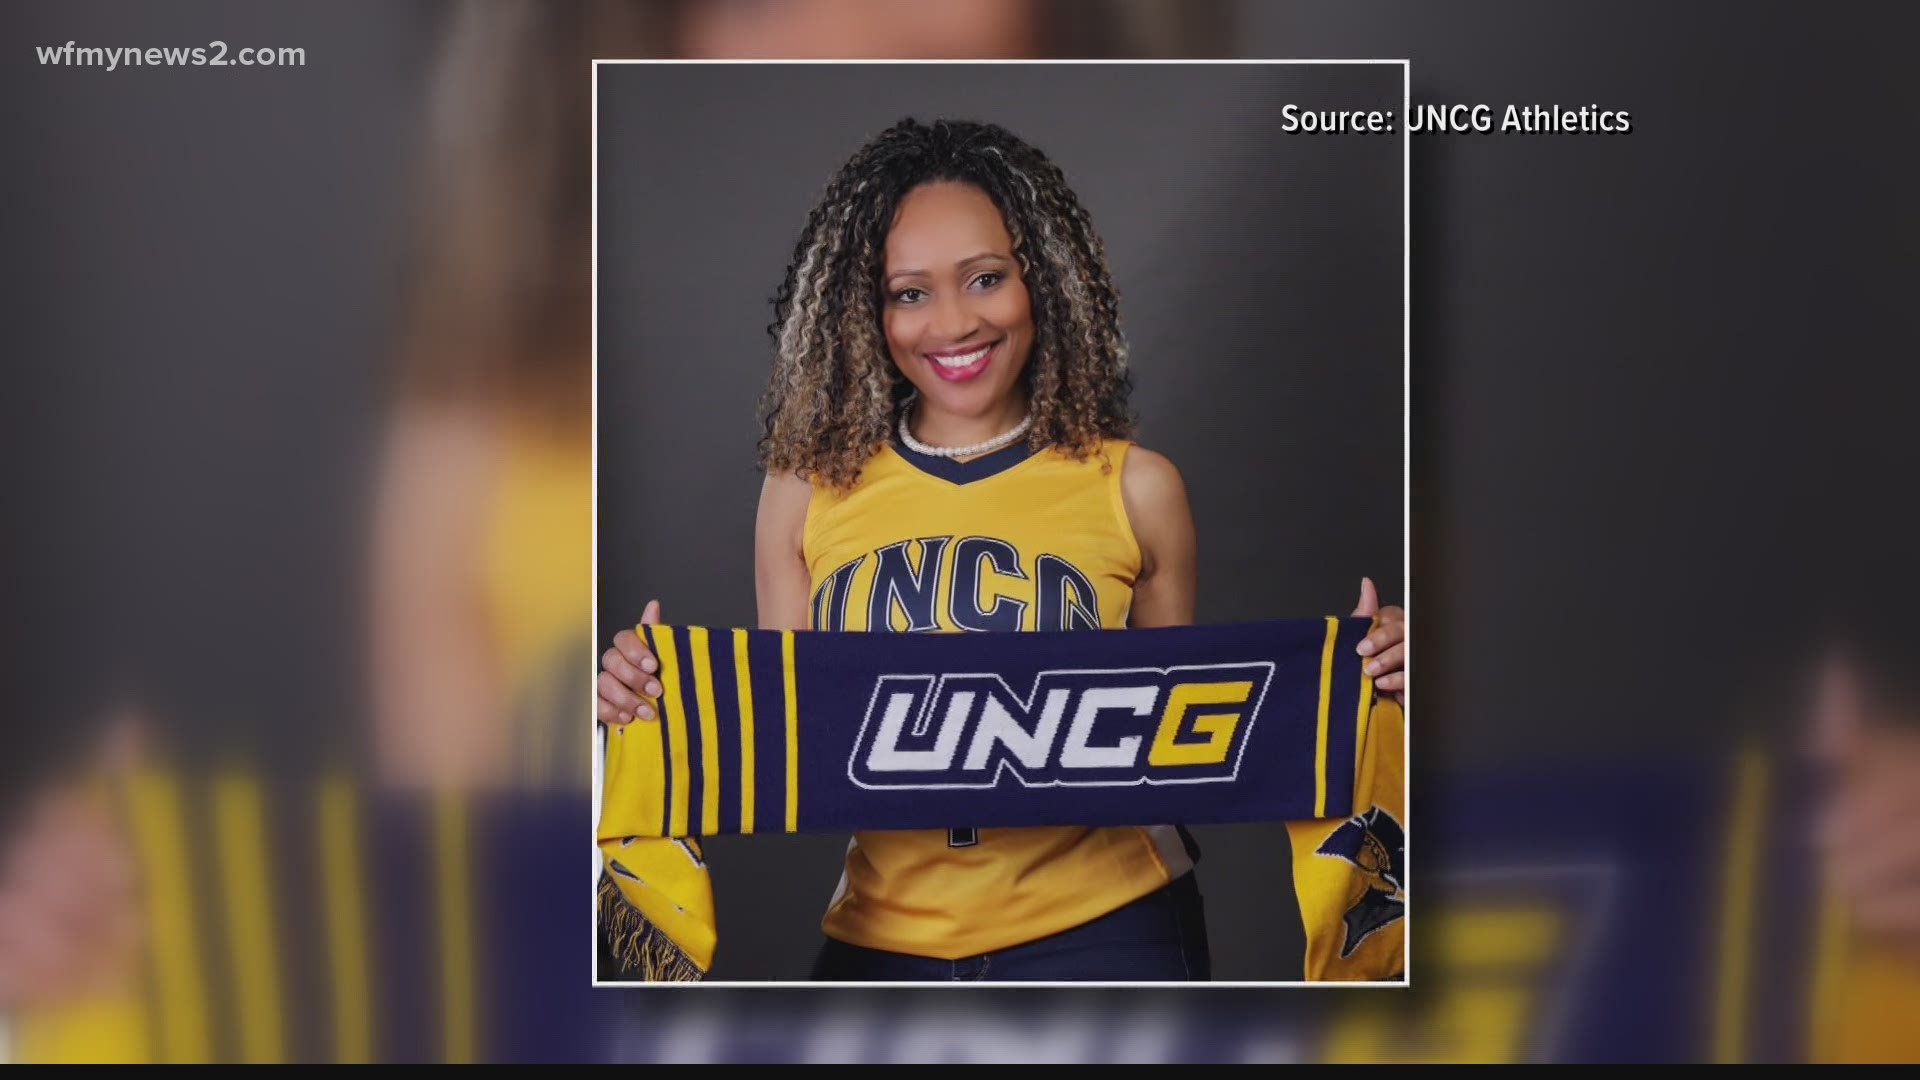 Angela Polk-Jones is one of the best UNCG athlete's UNCG has ever seen. Now, she might be even greater off the floor.